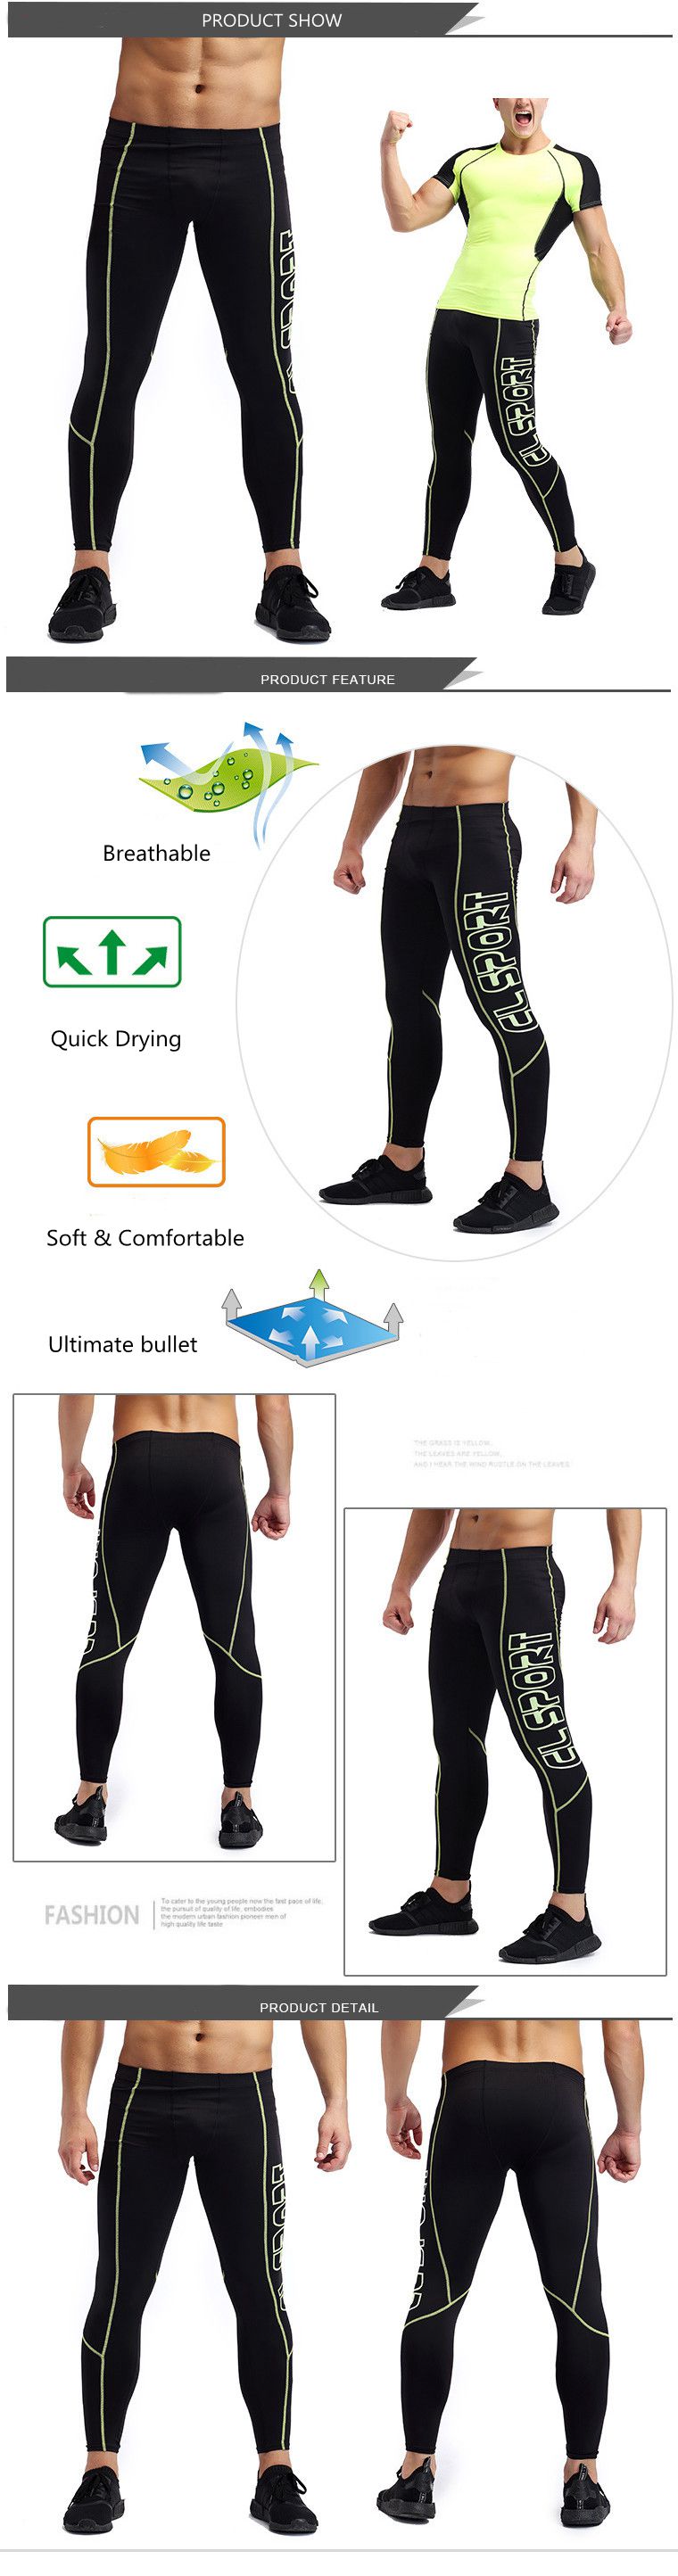 High-Comfort-Sports-Gym-Jogging-Tight-Pants-Bodybuilding-Breathable-Skinny-Legging-Trousers-1184385